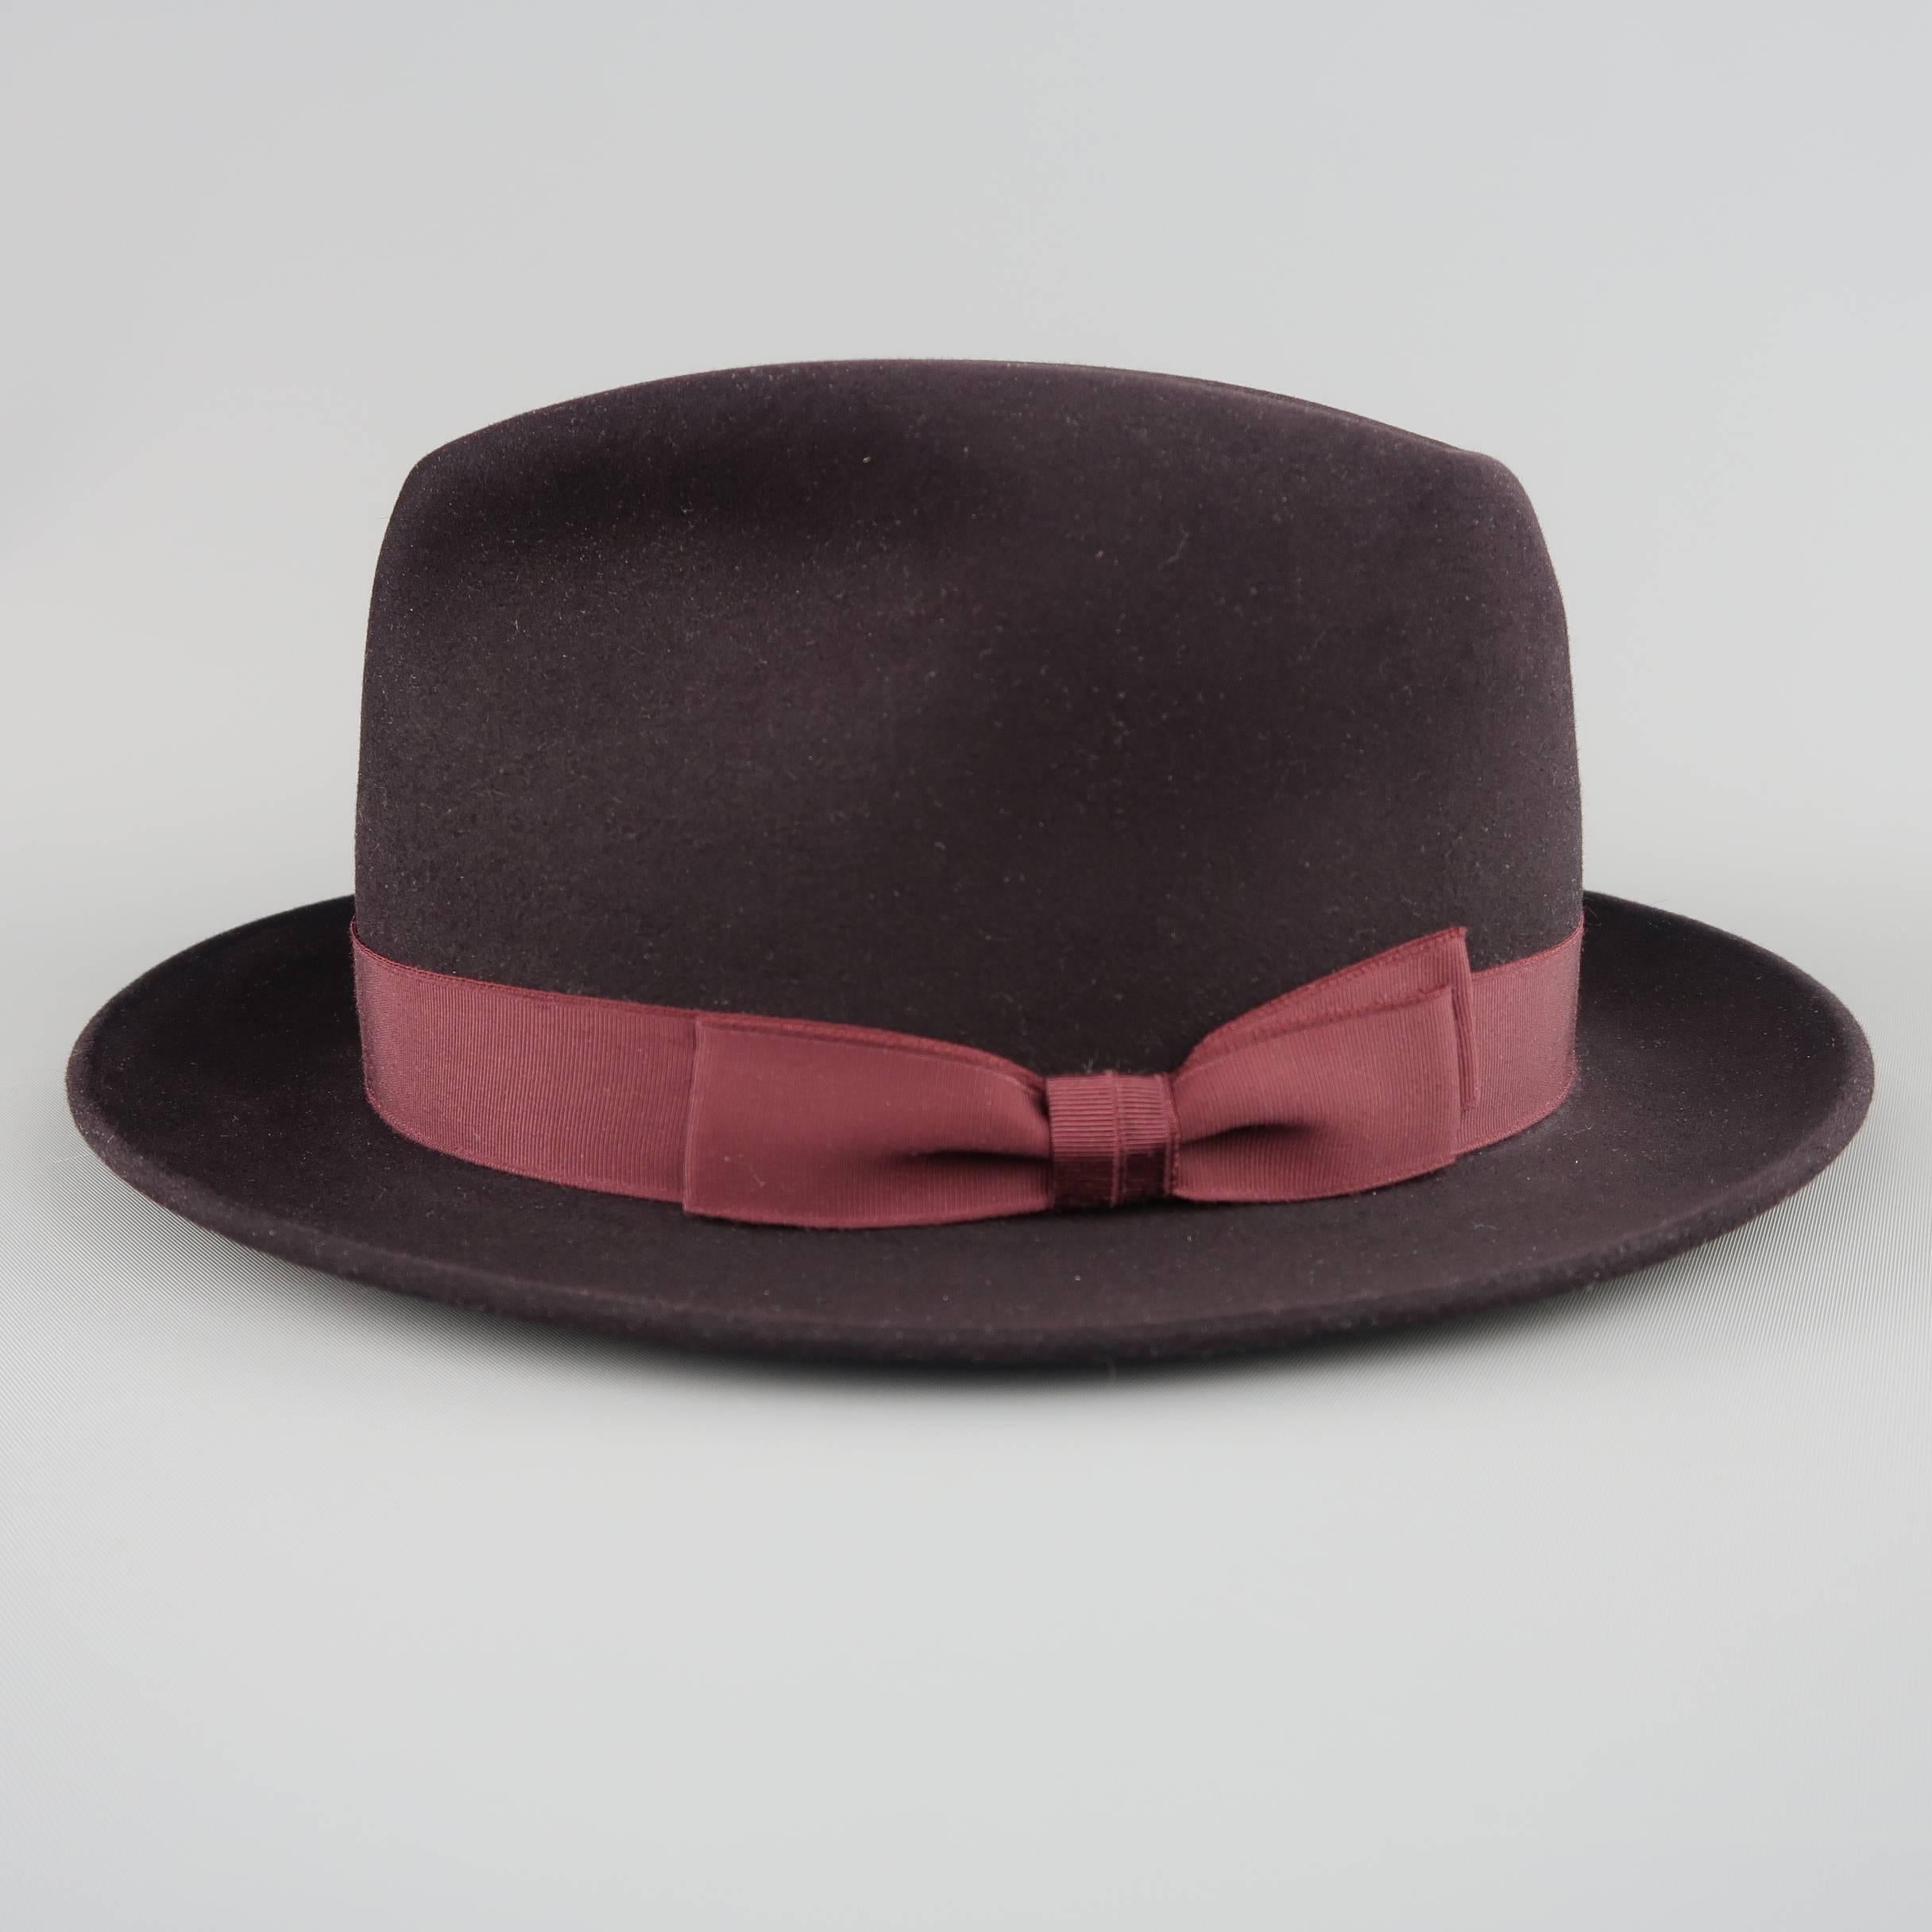 OPTIMO  fedora comes in eggplant purple felt with burgundy faille grosgrain ribbon. Includes original box.
 
Excellent Pre-Owned Condition.
Marked: 60
 
Size: 7 1/2
Brim: 2 in.


SKU: 85255